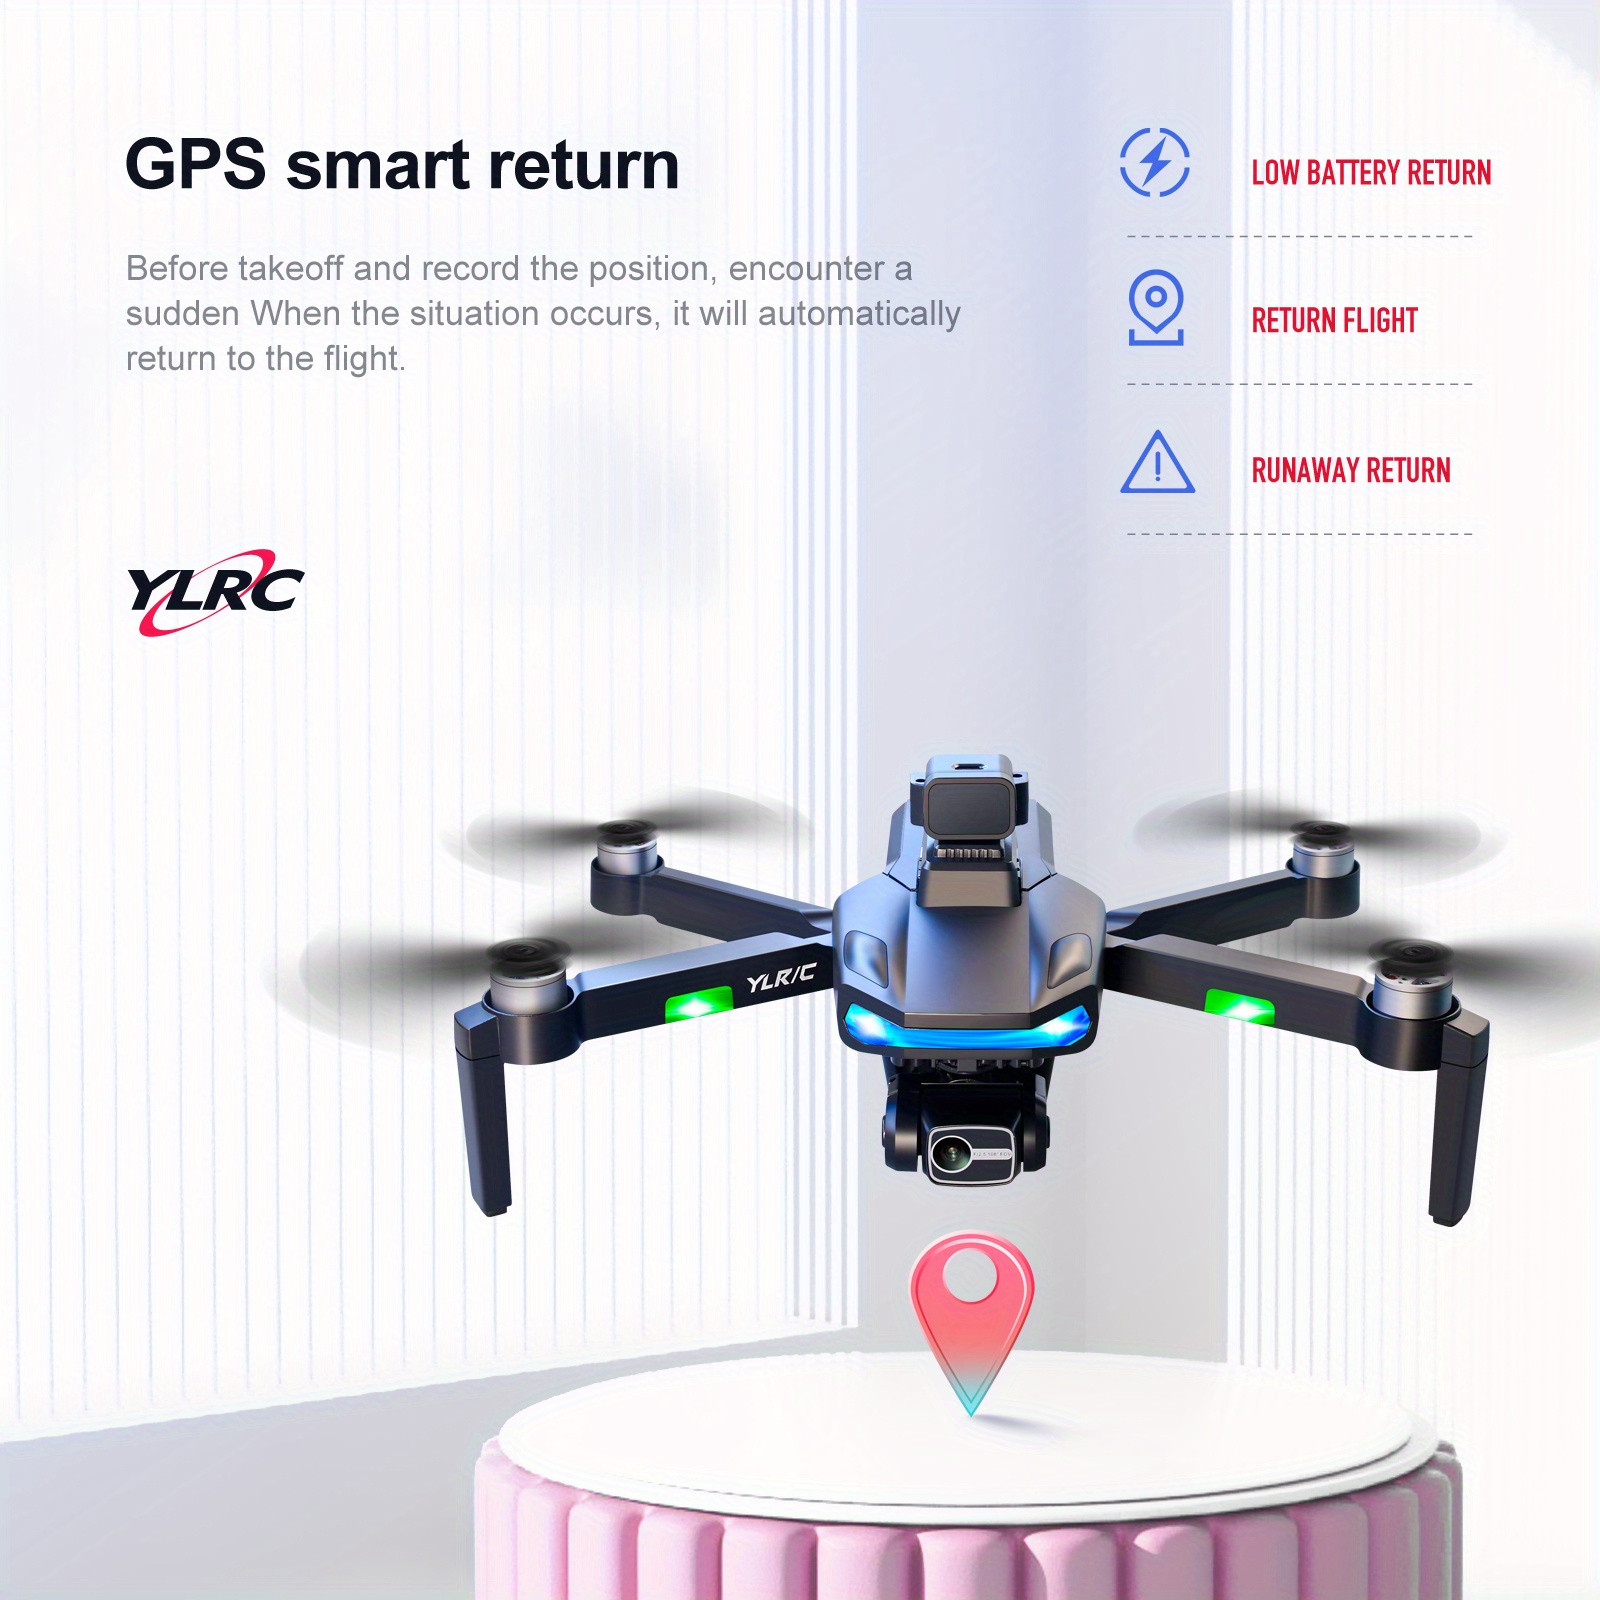 s135pro uav drone with quadruple radar obstacle avoidance extended flight time 5g signal dual wifi 1080p camera perfect gift for men women teenagers details 2